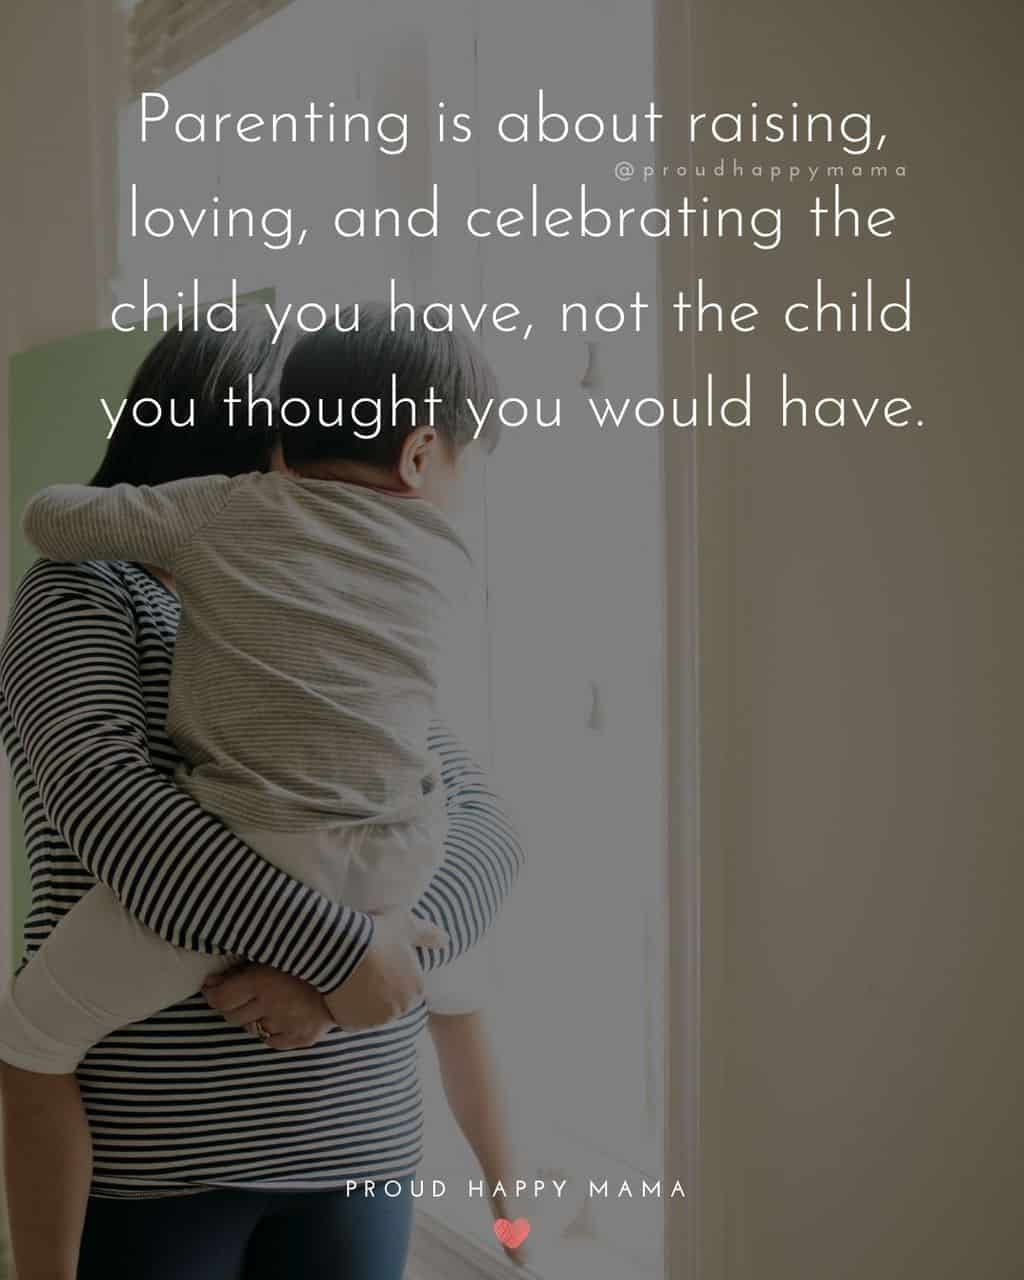 Parenting Quotes - Parenting is about raising, loving, and celebrating the child you have, not the child you thought you would have.’